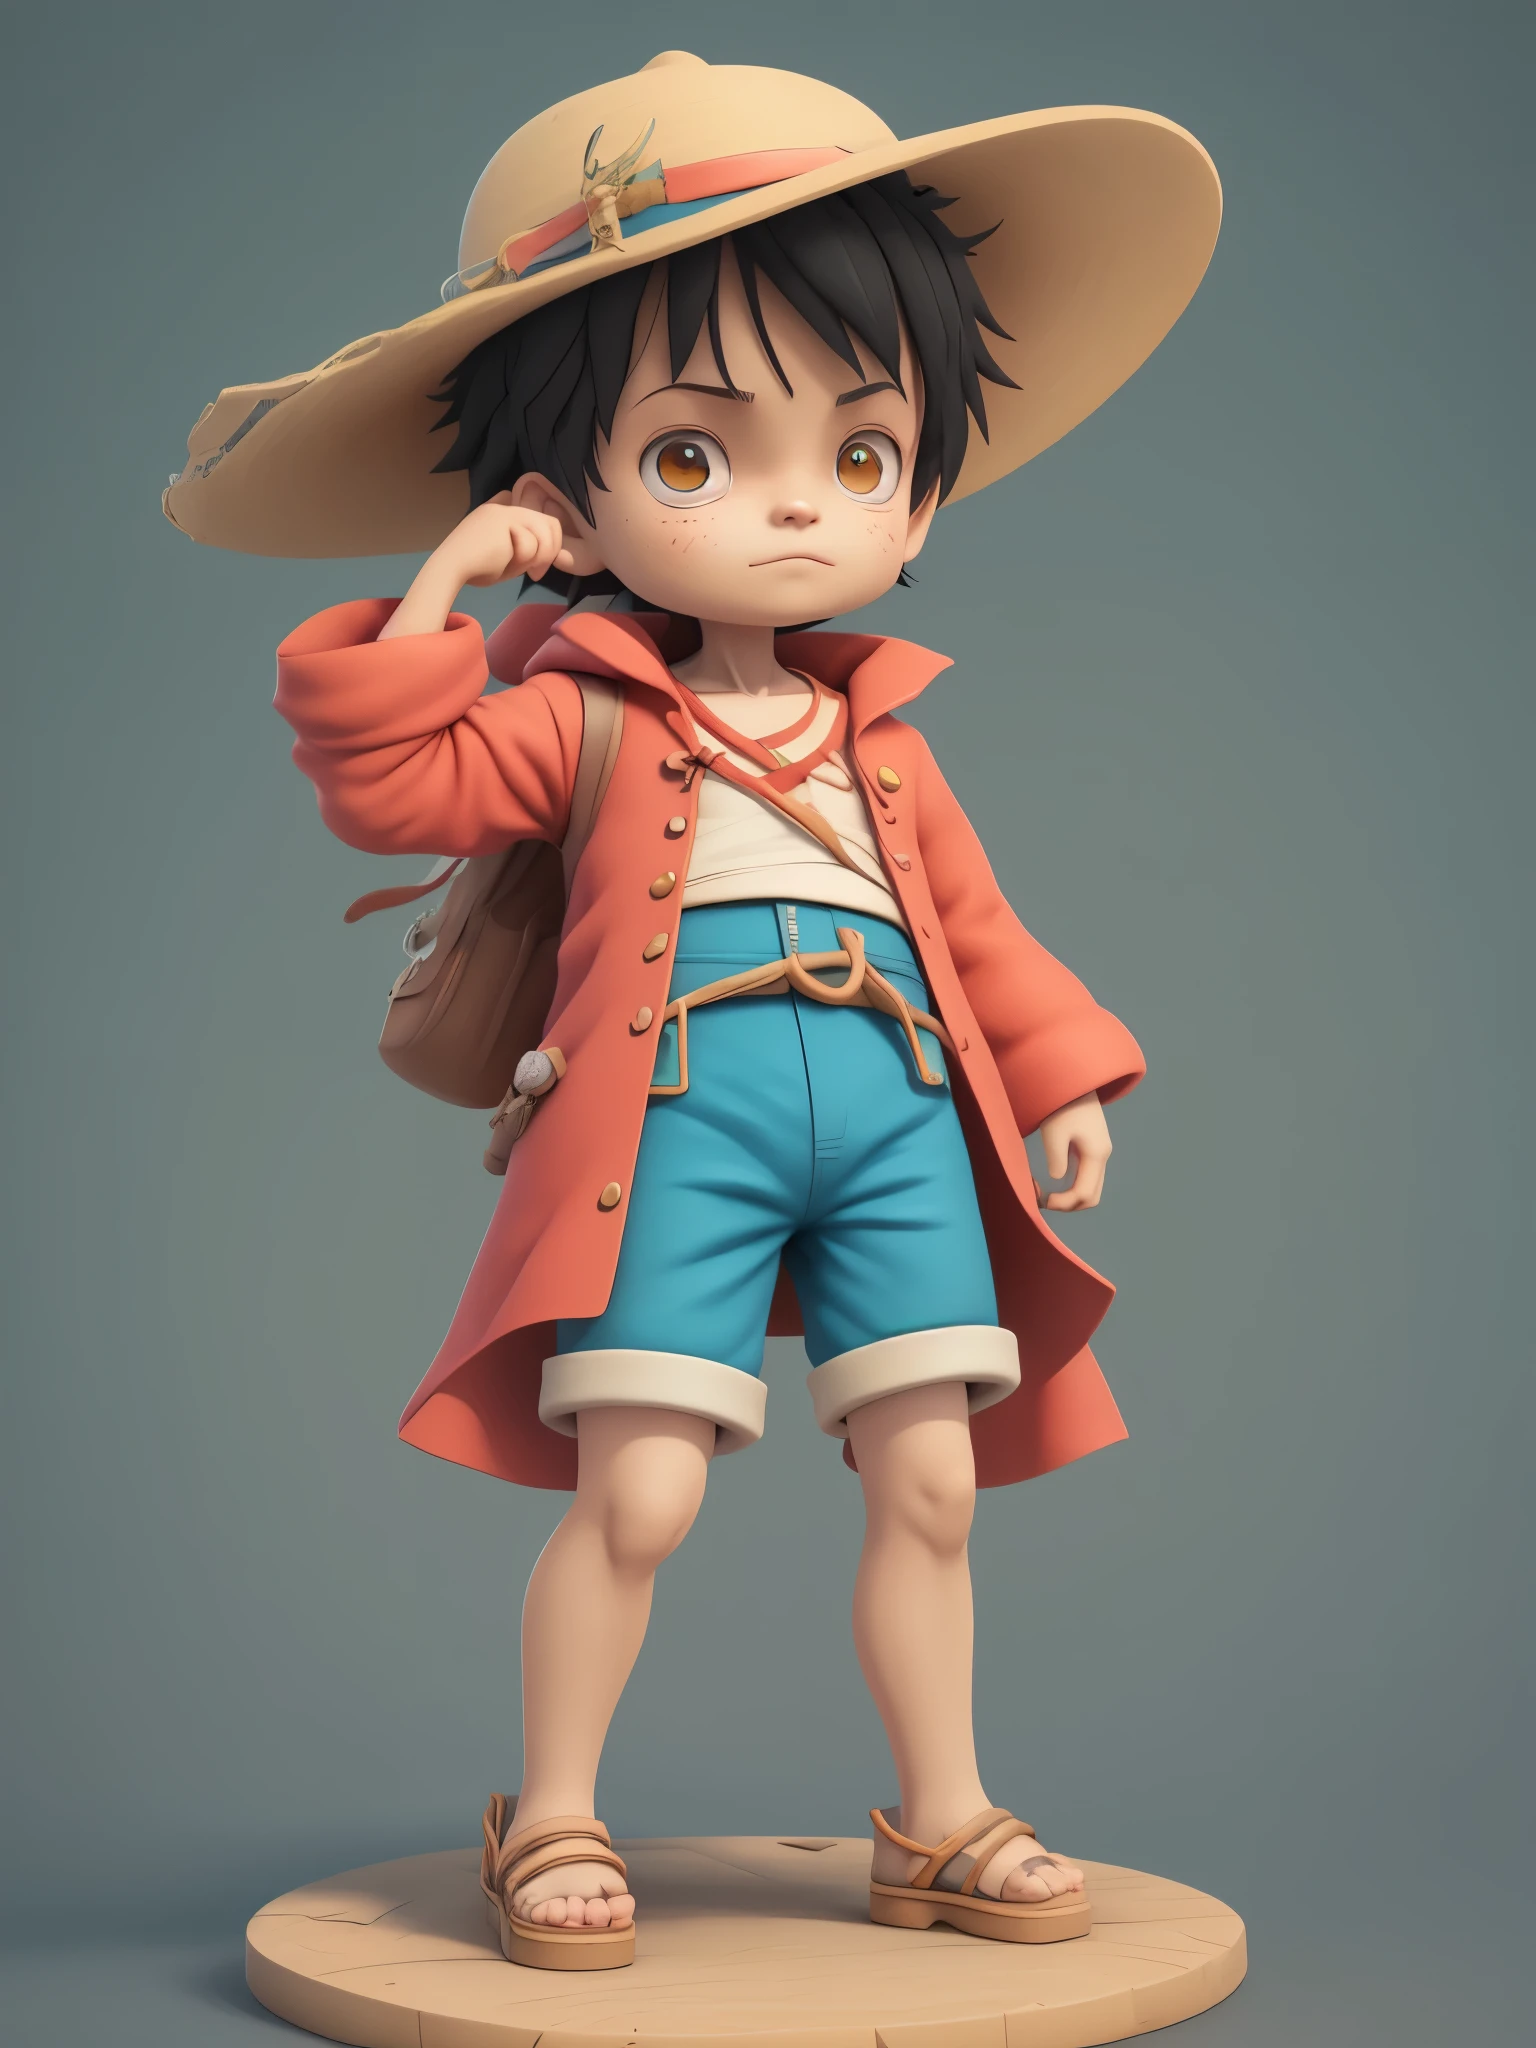 cute 3d render, cute detailed digital art, male pirate mini cute boy, cute digital painting, stylized 3d render, cute digital art, cute render 3d anime boy, luffy the little pirate looks up, cute! c4d, portrait anime sea pirate boy, he is wearing an open long-sleeved red cardigan with four buttons, with a yellow sash tied around his waist, blue shorts with cuffs, sandals, Straw hat with a red ribbon.